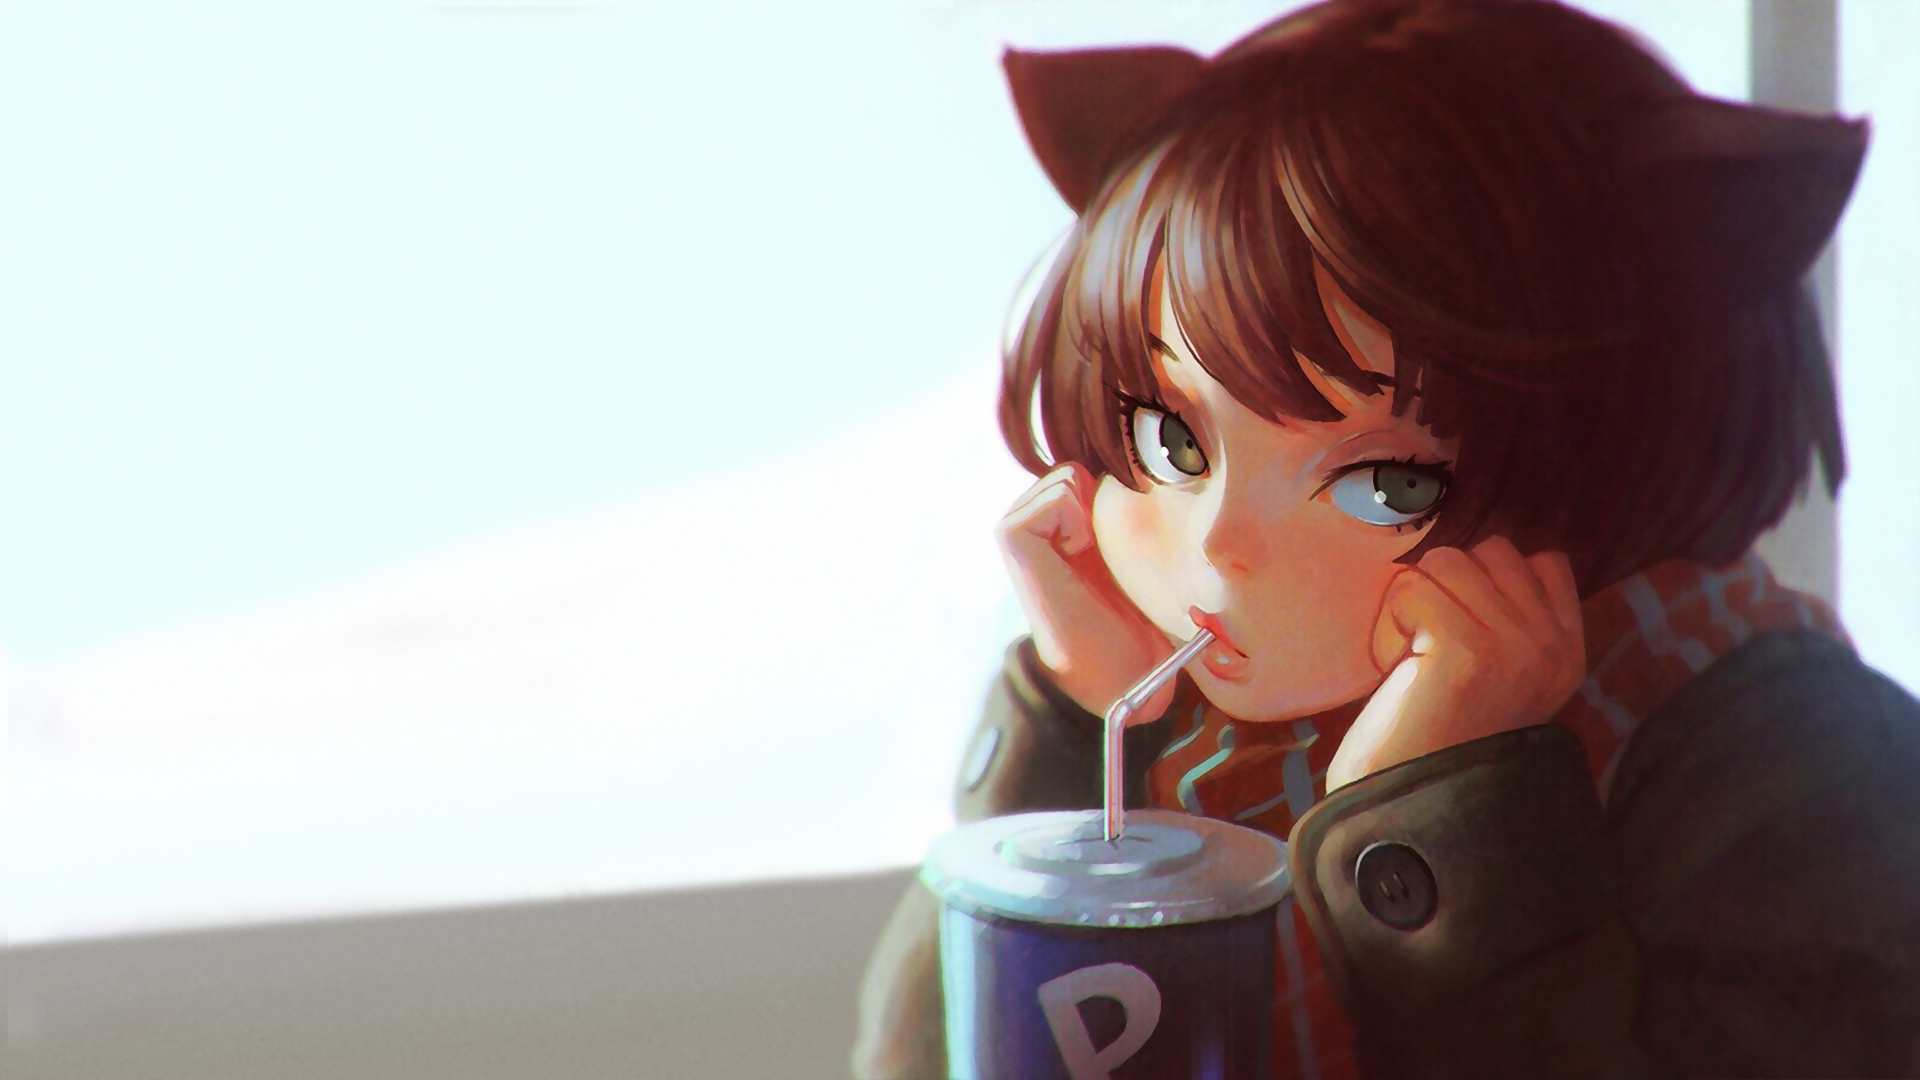 Desktop Wallpaper Cute Anime Girl Drinking Coffee, HD Image, Picture, Background, 8rt549